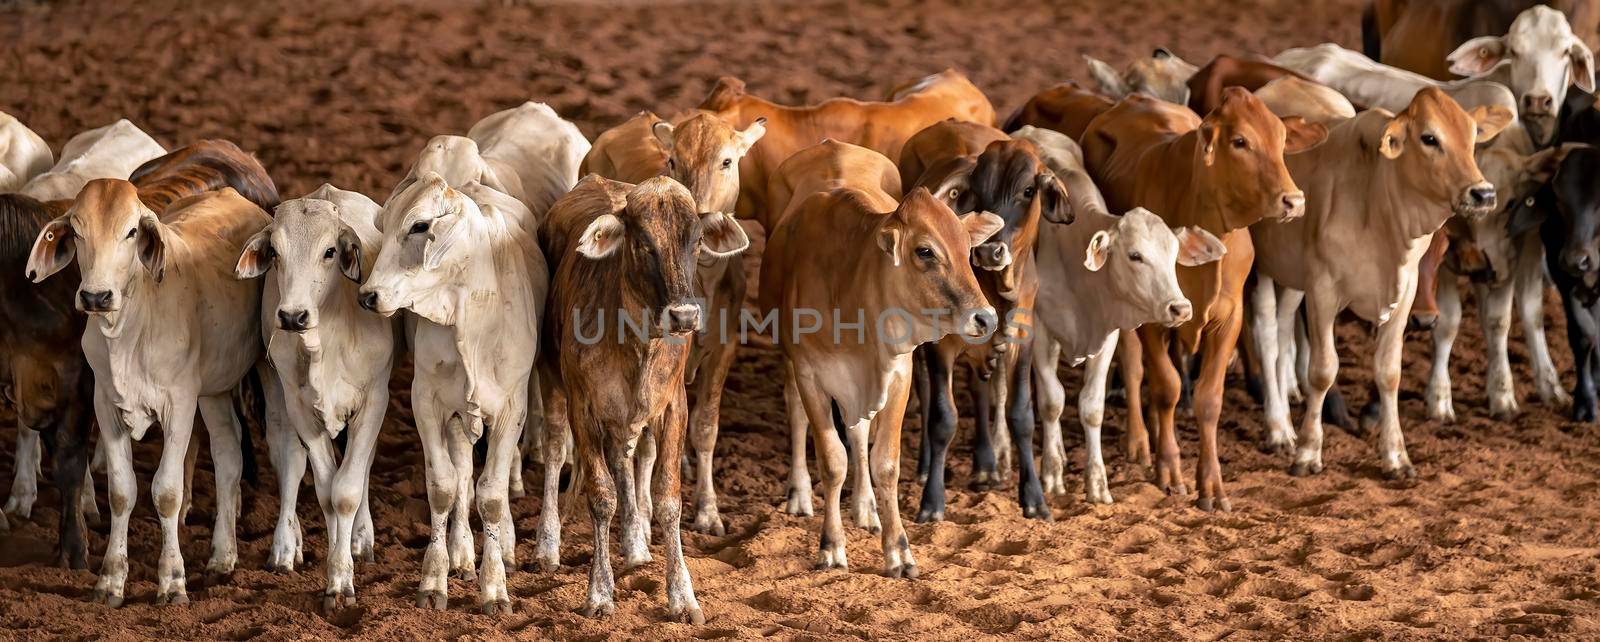 Calves herded in an arena during a cutting competition